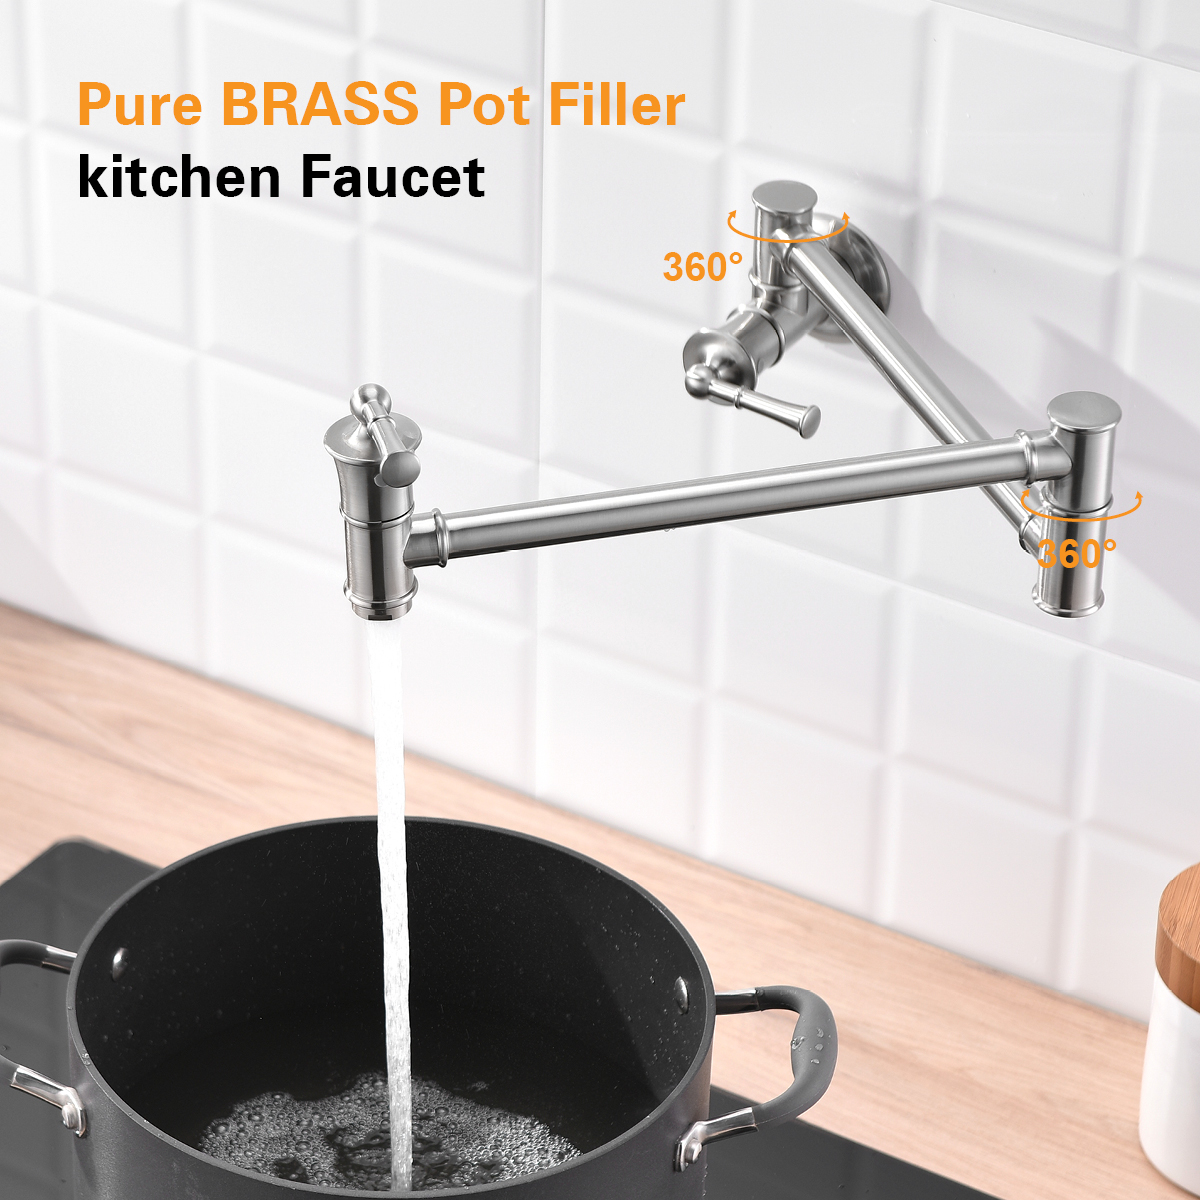 Kitchen Faucet with Pot Filler Nickel Kitchen Faucet